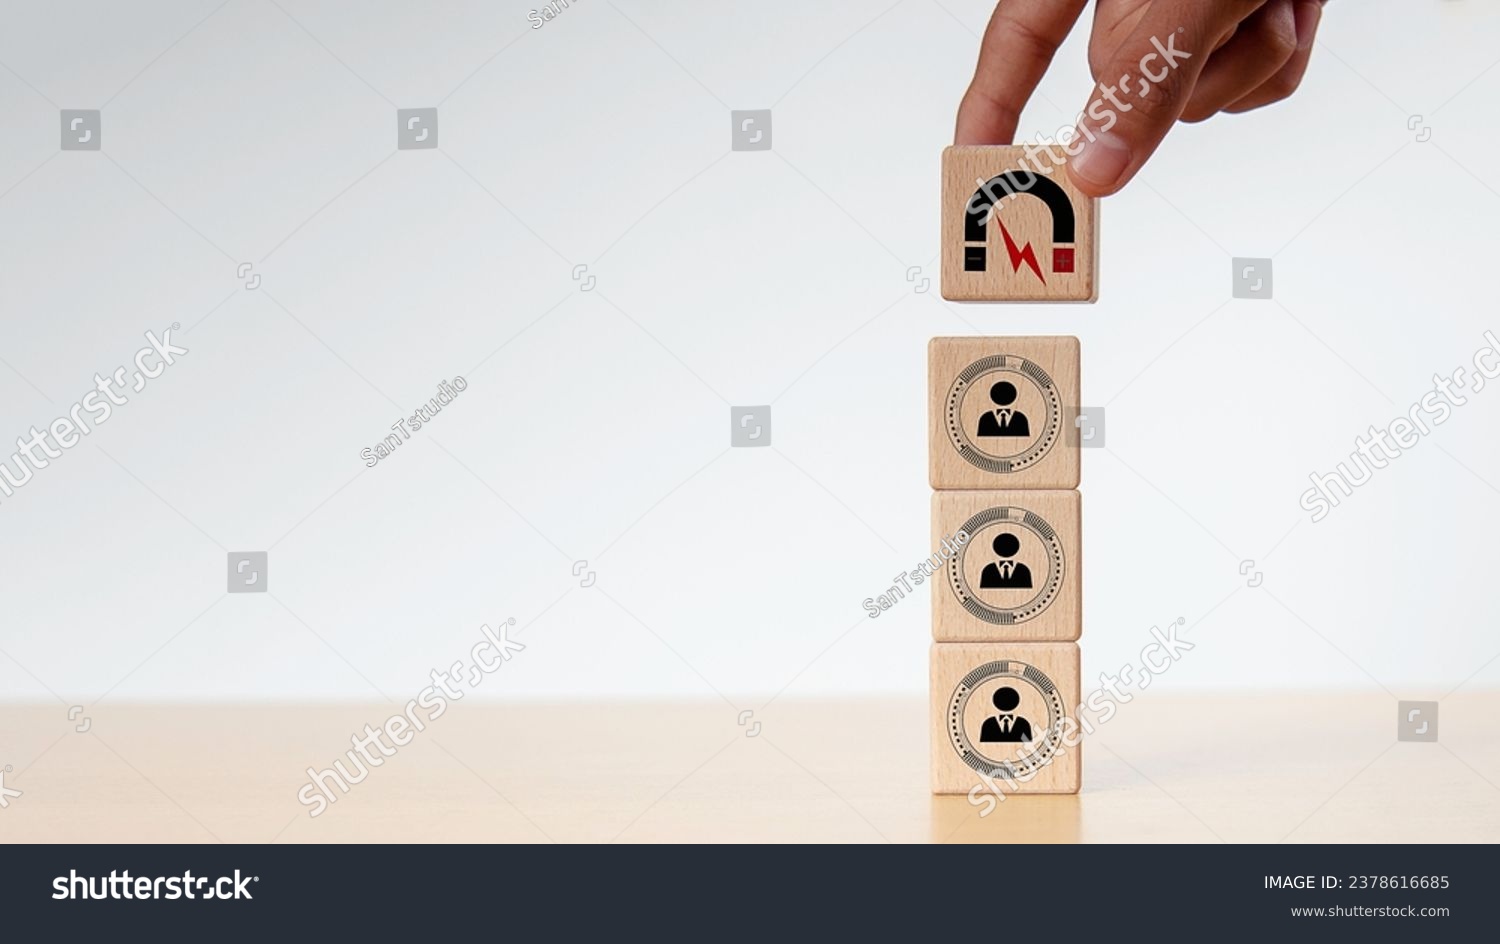 Businessman hold and put wooden cube block shape, Inbound marketing strategy, Wooden cubes with magnet icon attracts the customer icons.customer retention, digital marketing and attracting potential. #2378616685